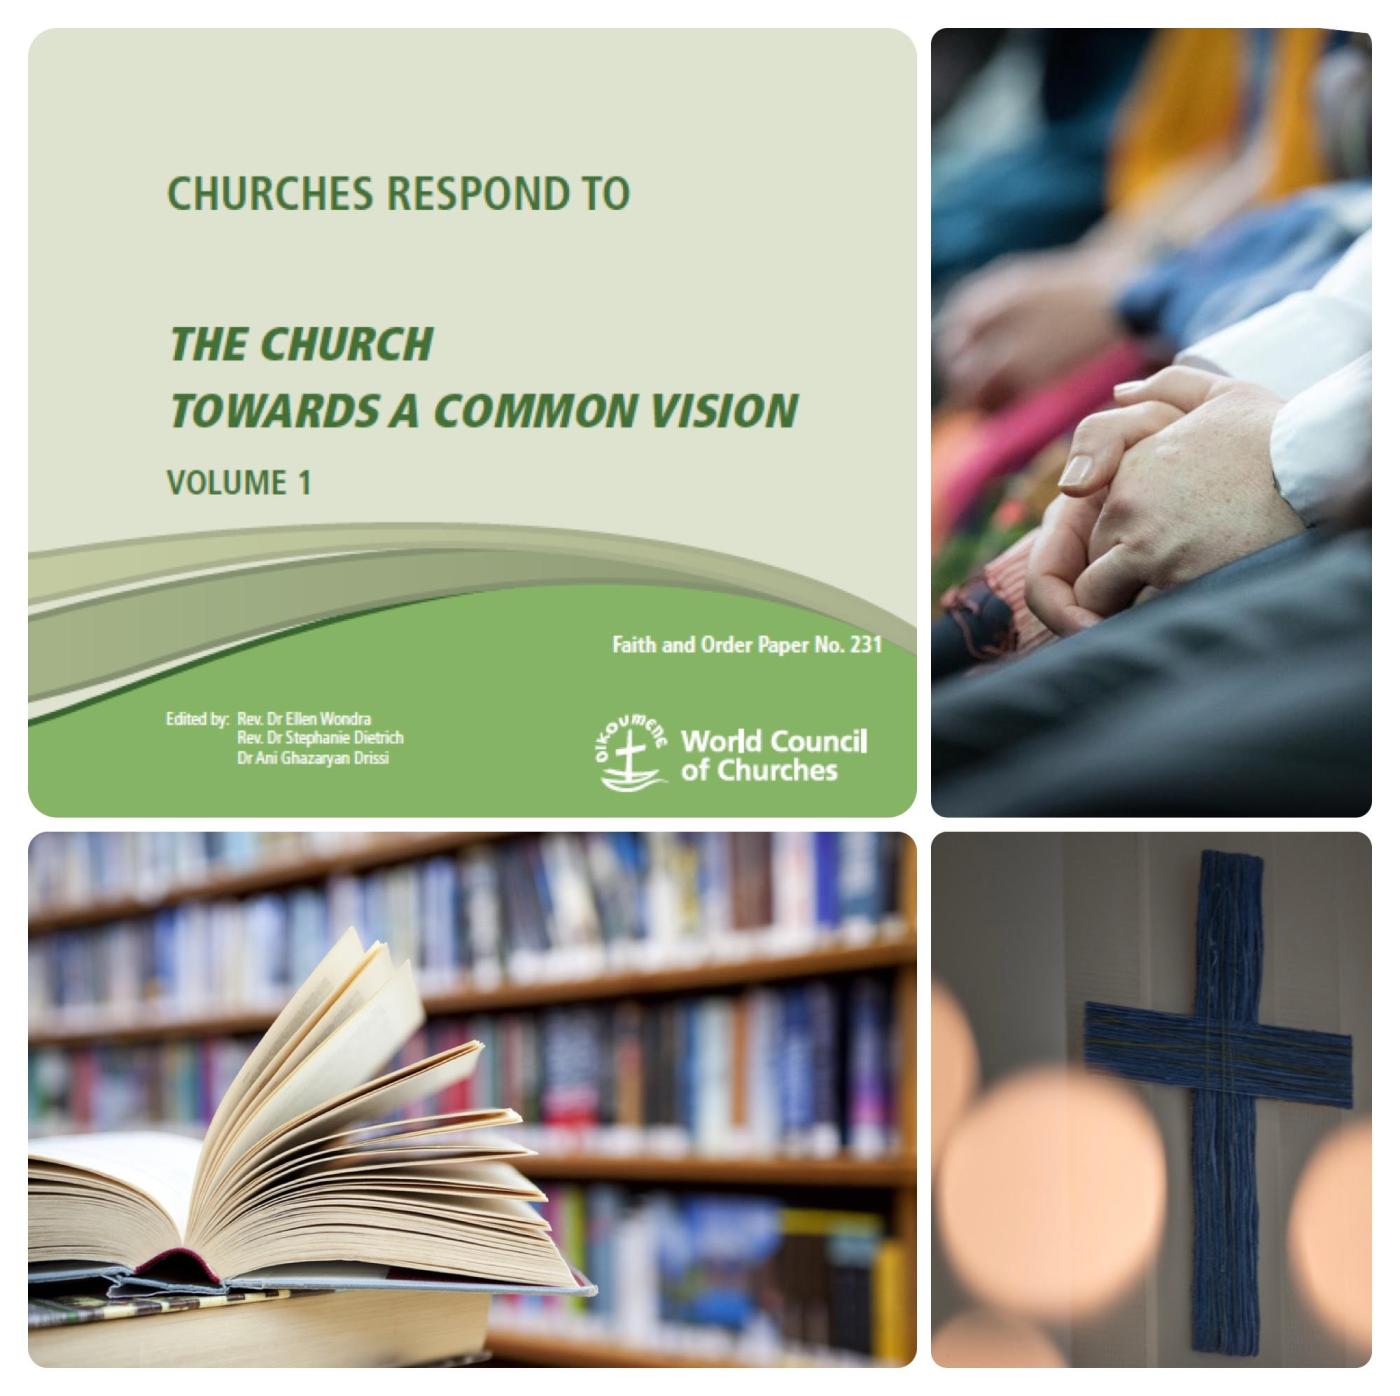 The World Council of Churches (WCC) Commission on Faith and Order is initiating a new webinar series to discuss responses to its second convergence document “The Church: Towards a Common Vision” 